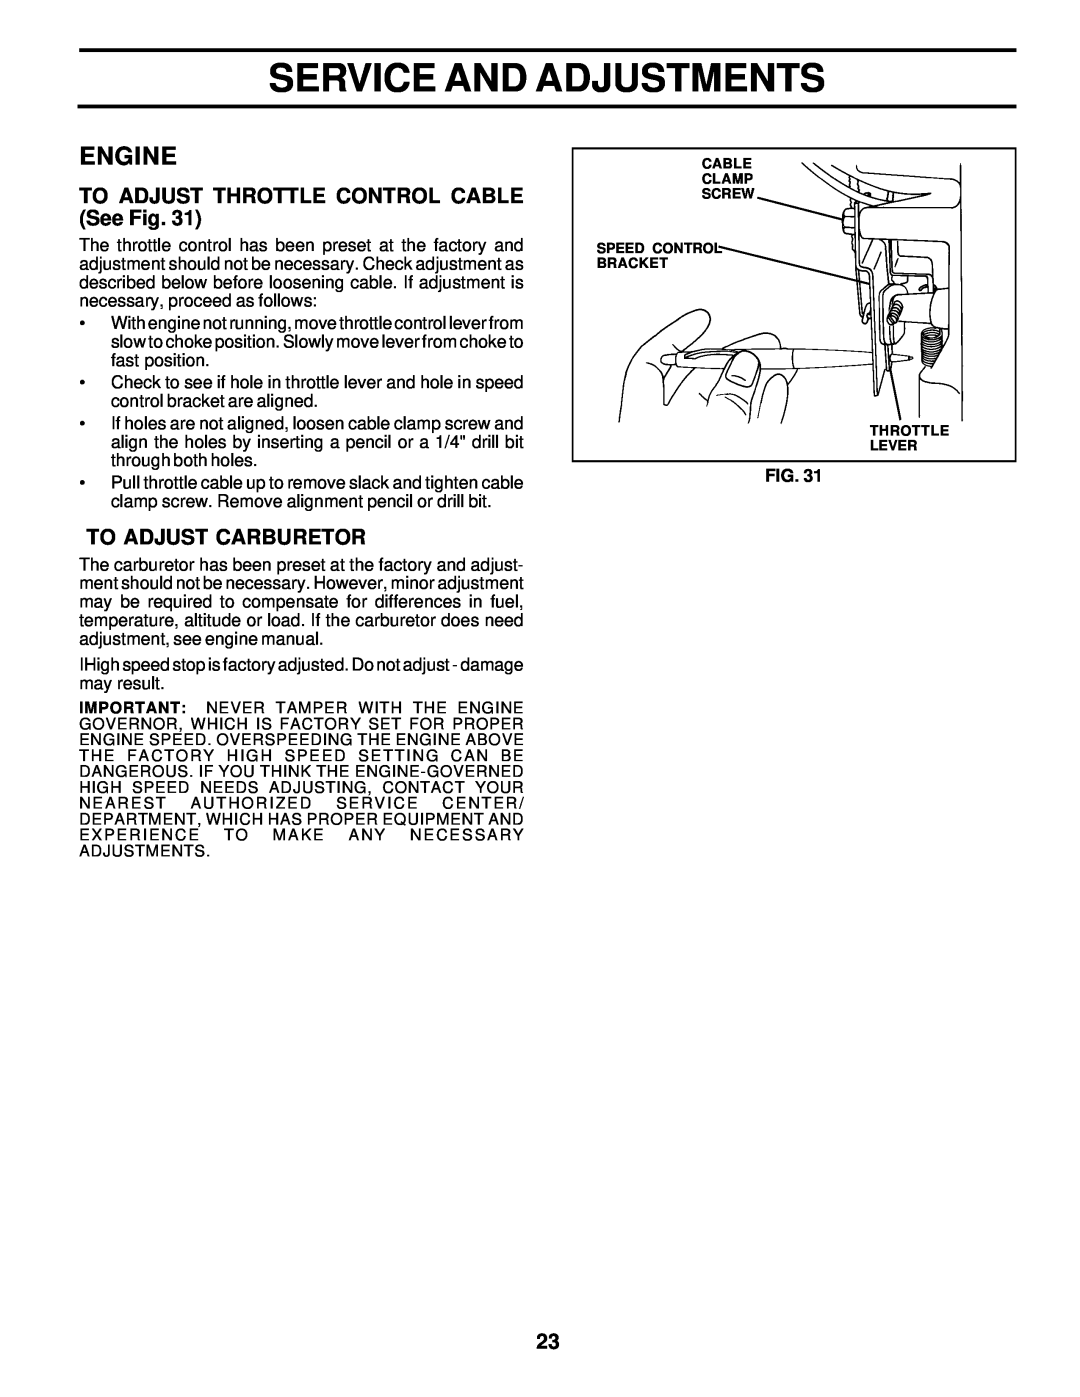 Poulan PRK17G42STB TO ADJUST THROTTLE CONTROL CABLE See Fig, To Adjust Carburetor, Service And Adjustments, Engine 